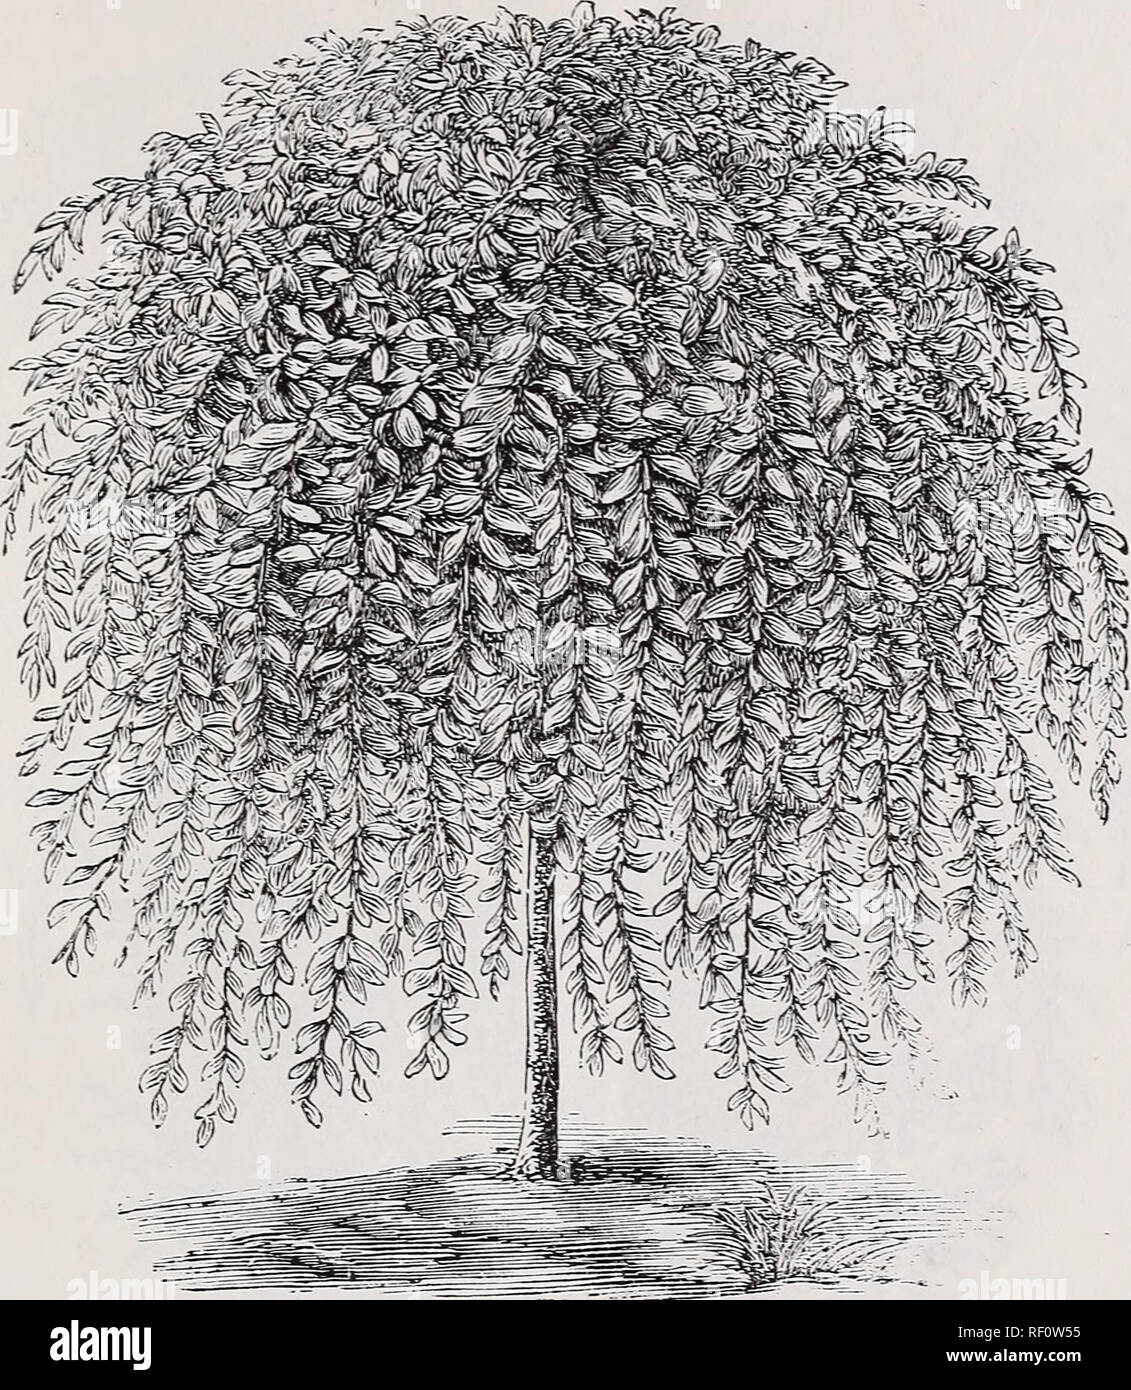 . Catalogue of ornamental trees &amp; plants. Nurseries (Horticulture) New Jersey Catalogs; Ornamental trees Catalogs; Ornamental shrubs Catalogs; Plants, Ornamental Catalogs. A. HAXCE &amp; SOX's CATALOGUE OF ORXAMEXTALS. 15. Salix Caprea Pendula. Kilmaknock Weeping Willow. Botanical Xame. SALIX Caprea Pendula Common Name. Willow, Kilmarnock &quot; Ten. Stand. Feet. Each. $1.00 &quot; &quot; '• &quot; strong 1.50 Succeeding admirably, as it does, in all soils, and forming a perfect umbrella-head without training, this tree has become vastly popular. Especially appropriate and in every way des Stock Photo